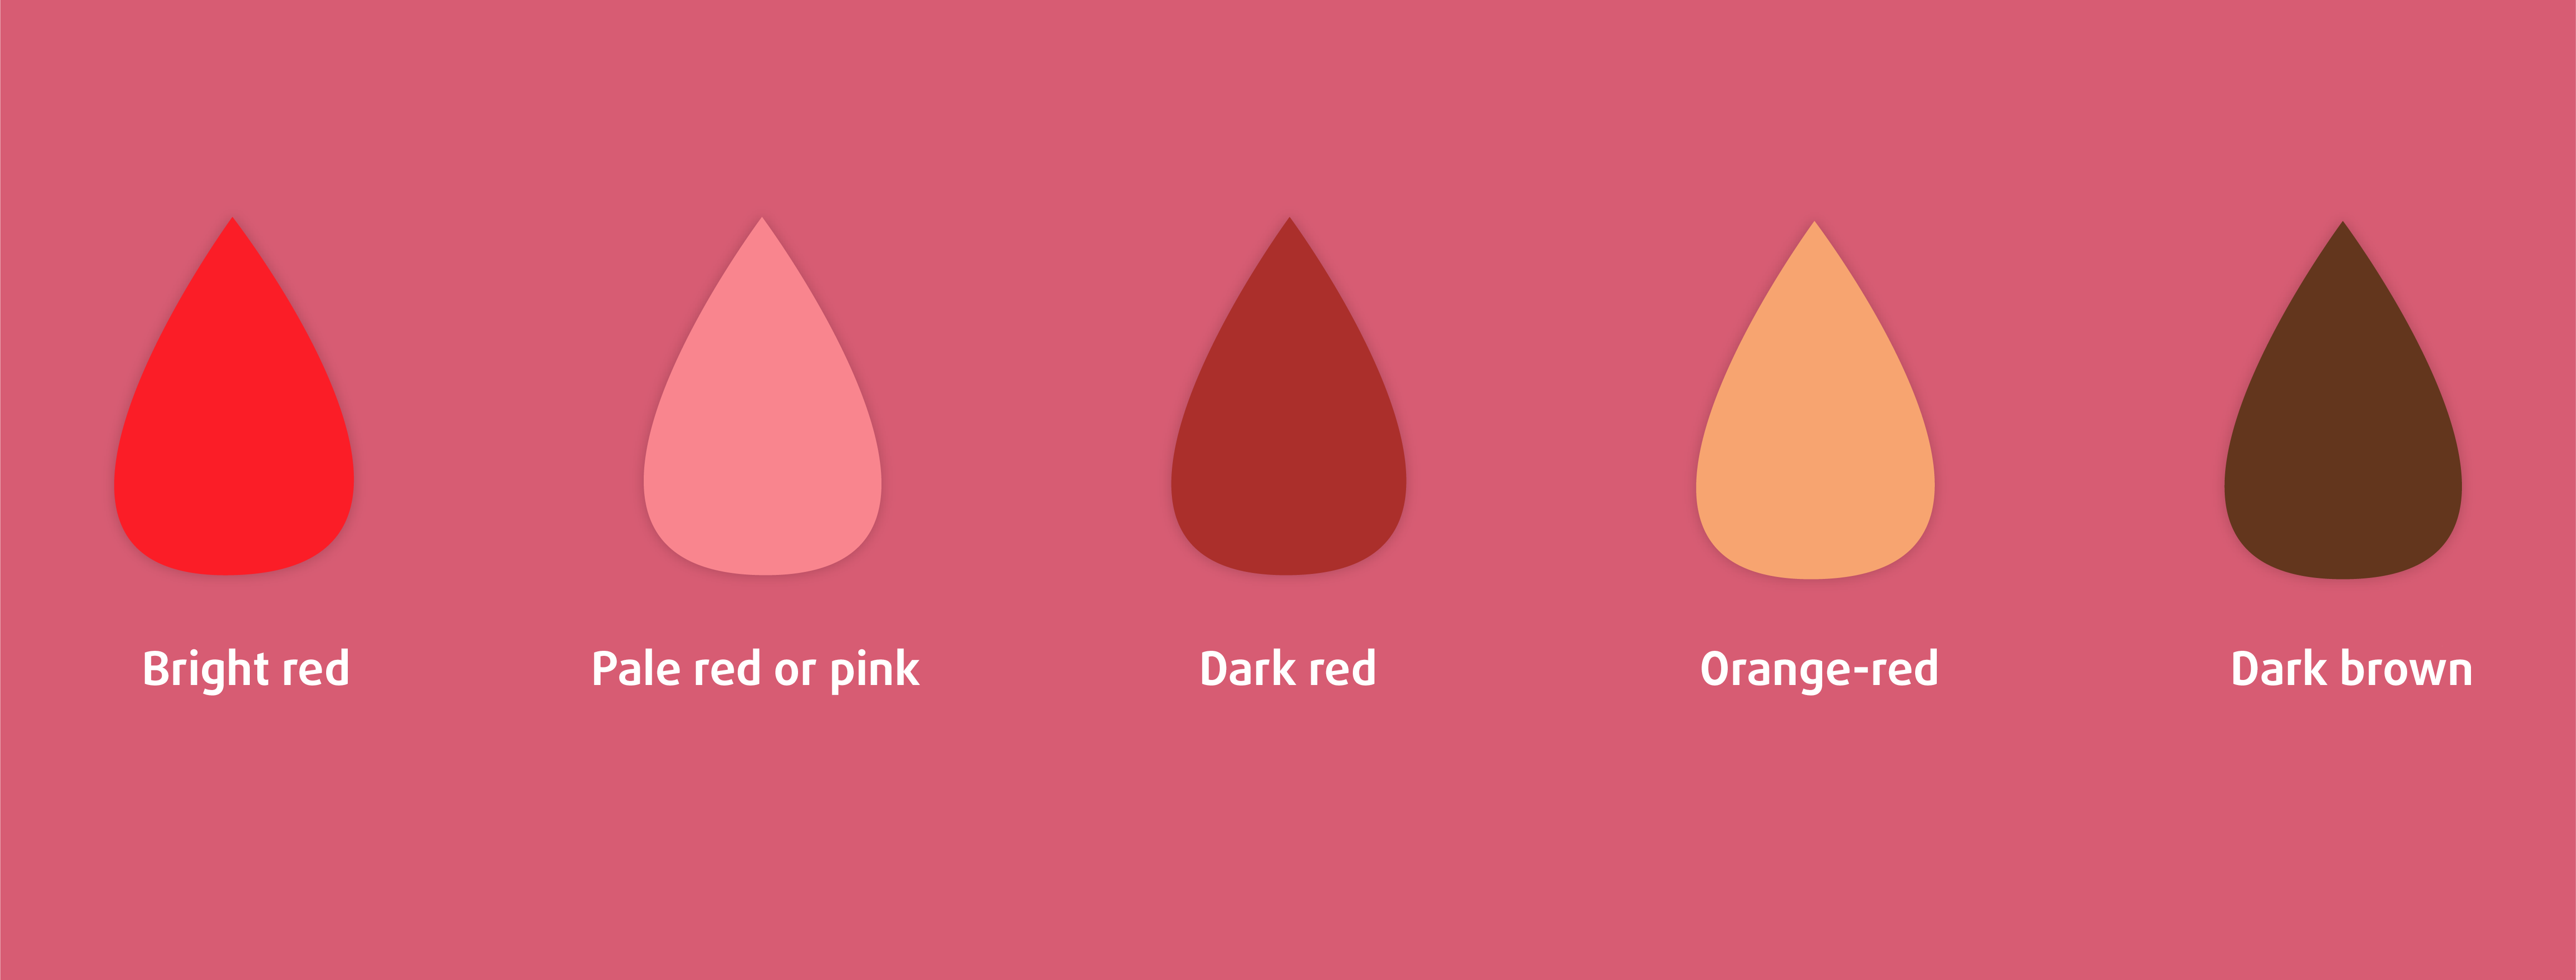 What does your menstrual blood say about your health? - Enna